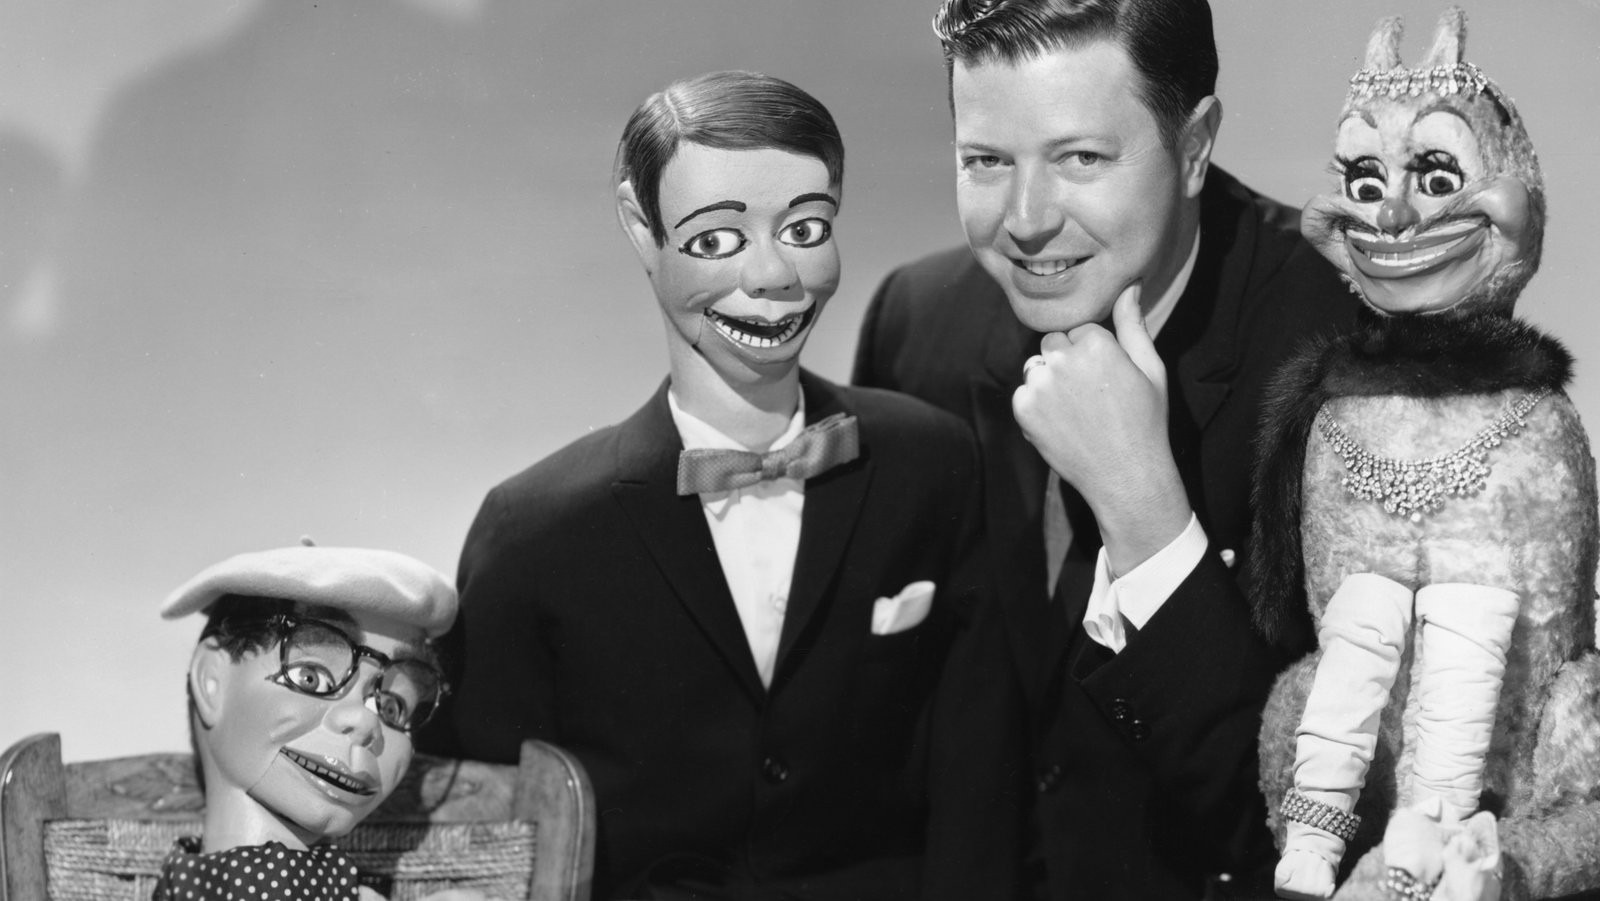 American ventriloquist Jimmy Nelson in the 1950s. Photo: James Kriegsmann / Michael Ochs Archive, via Getty Images